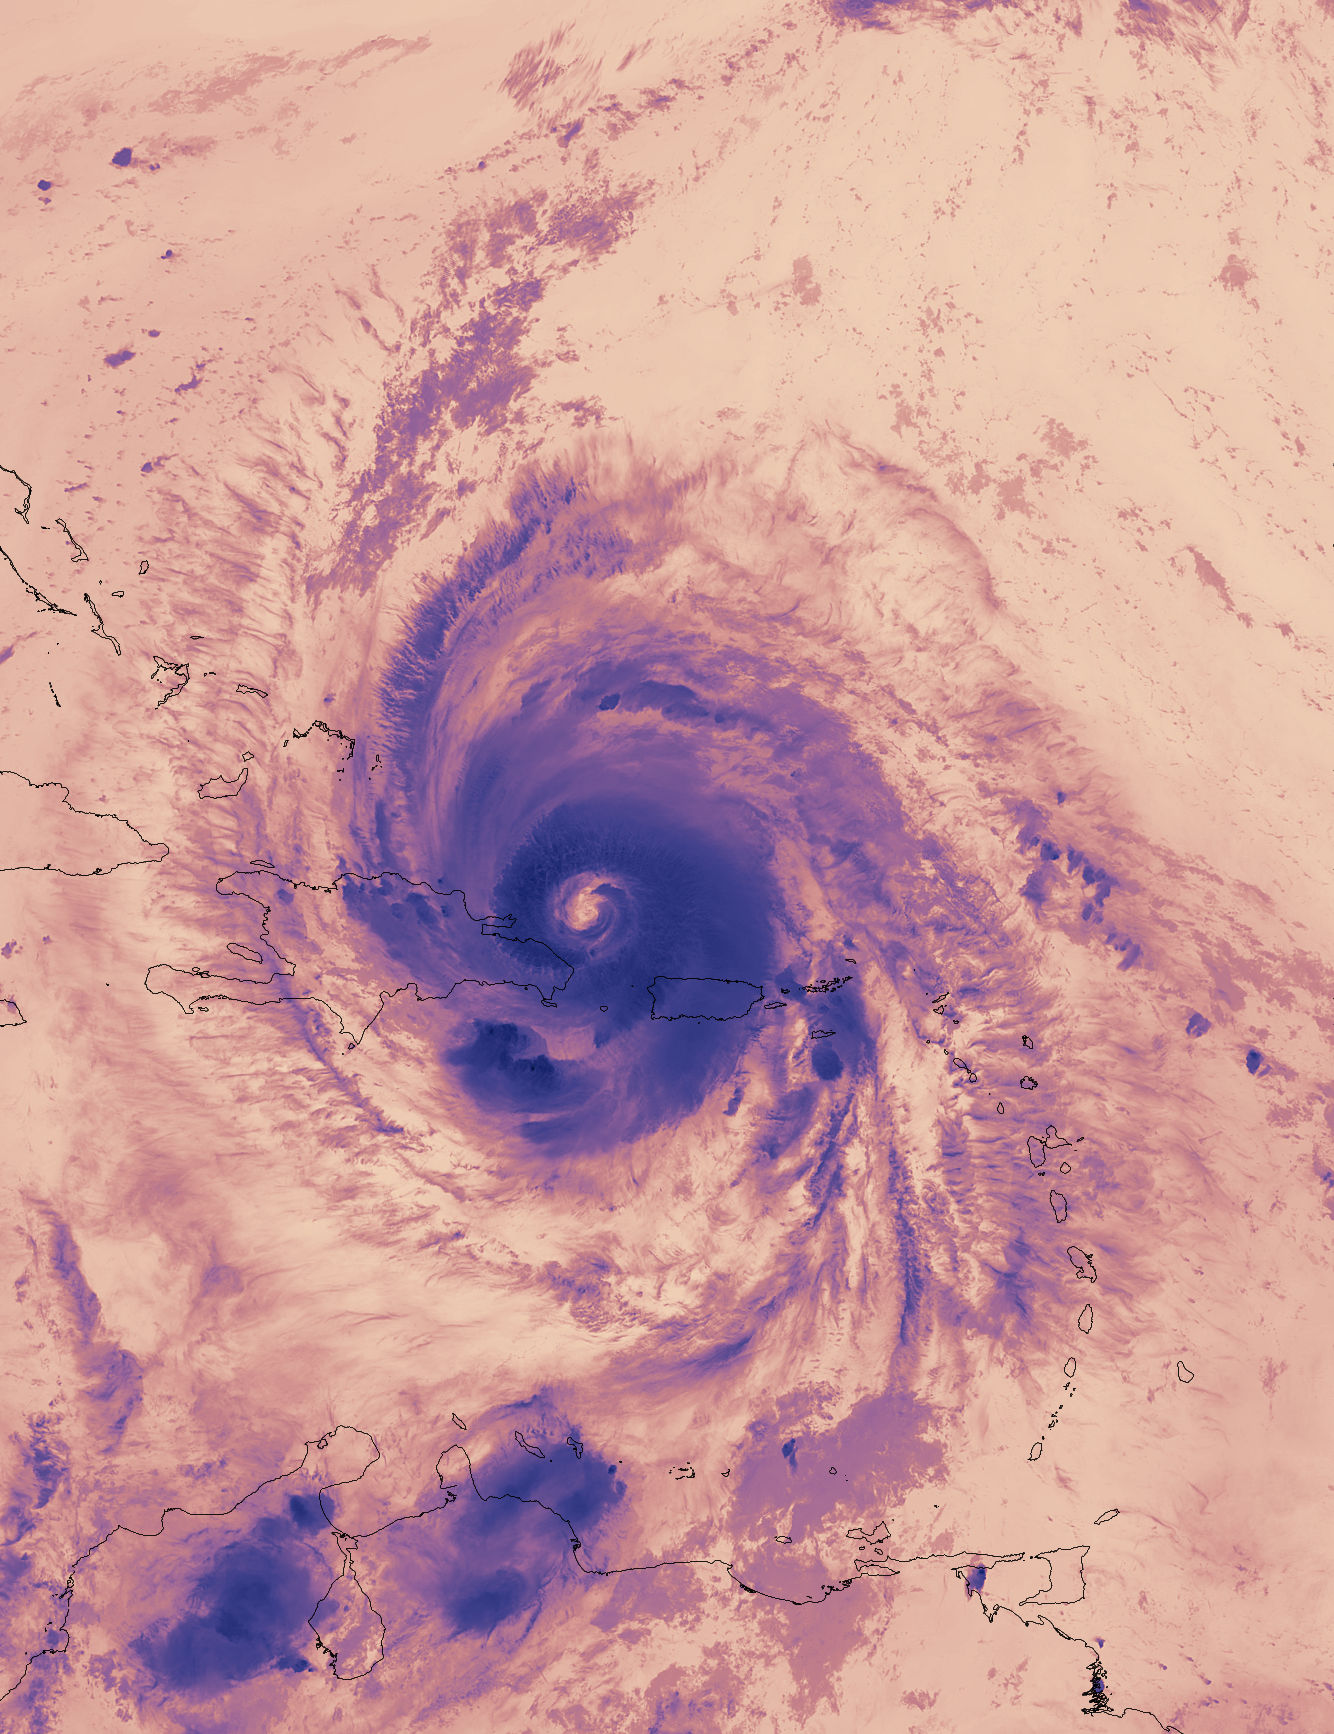 Suomi NPP image thermal view of Maria with clouds in dark purple.